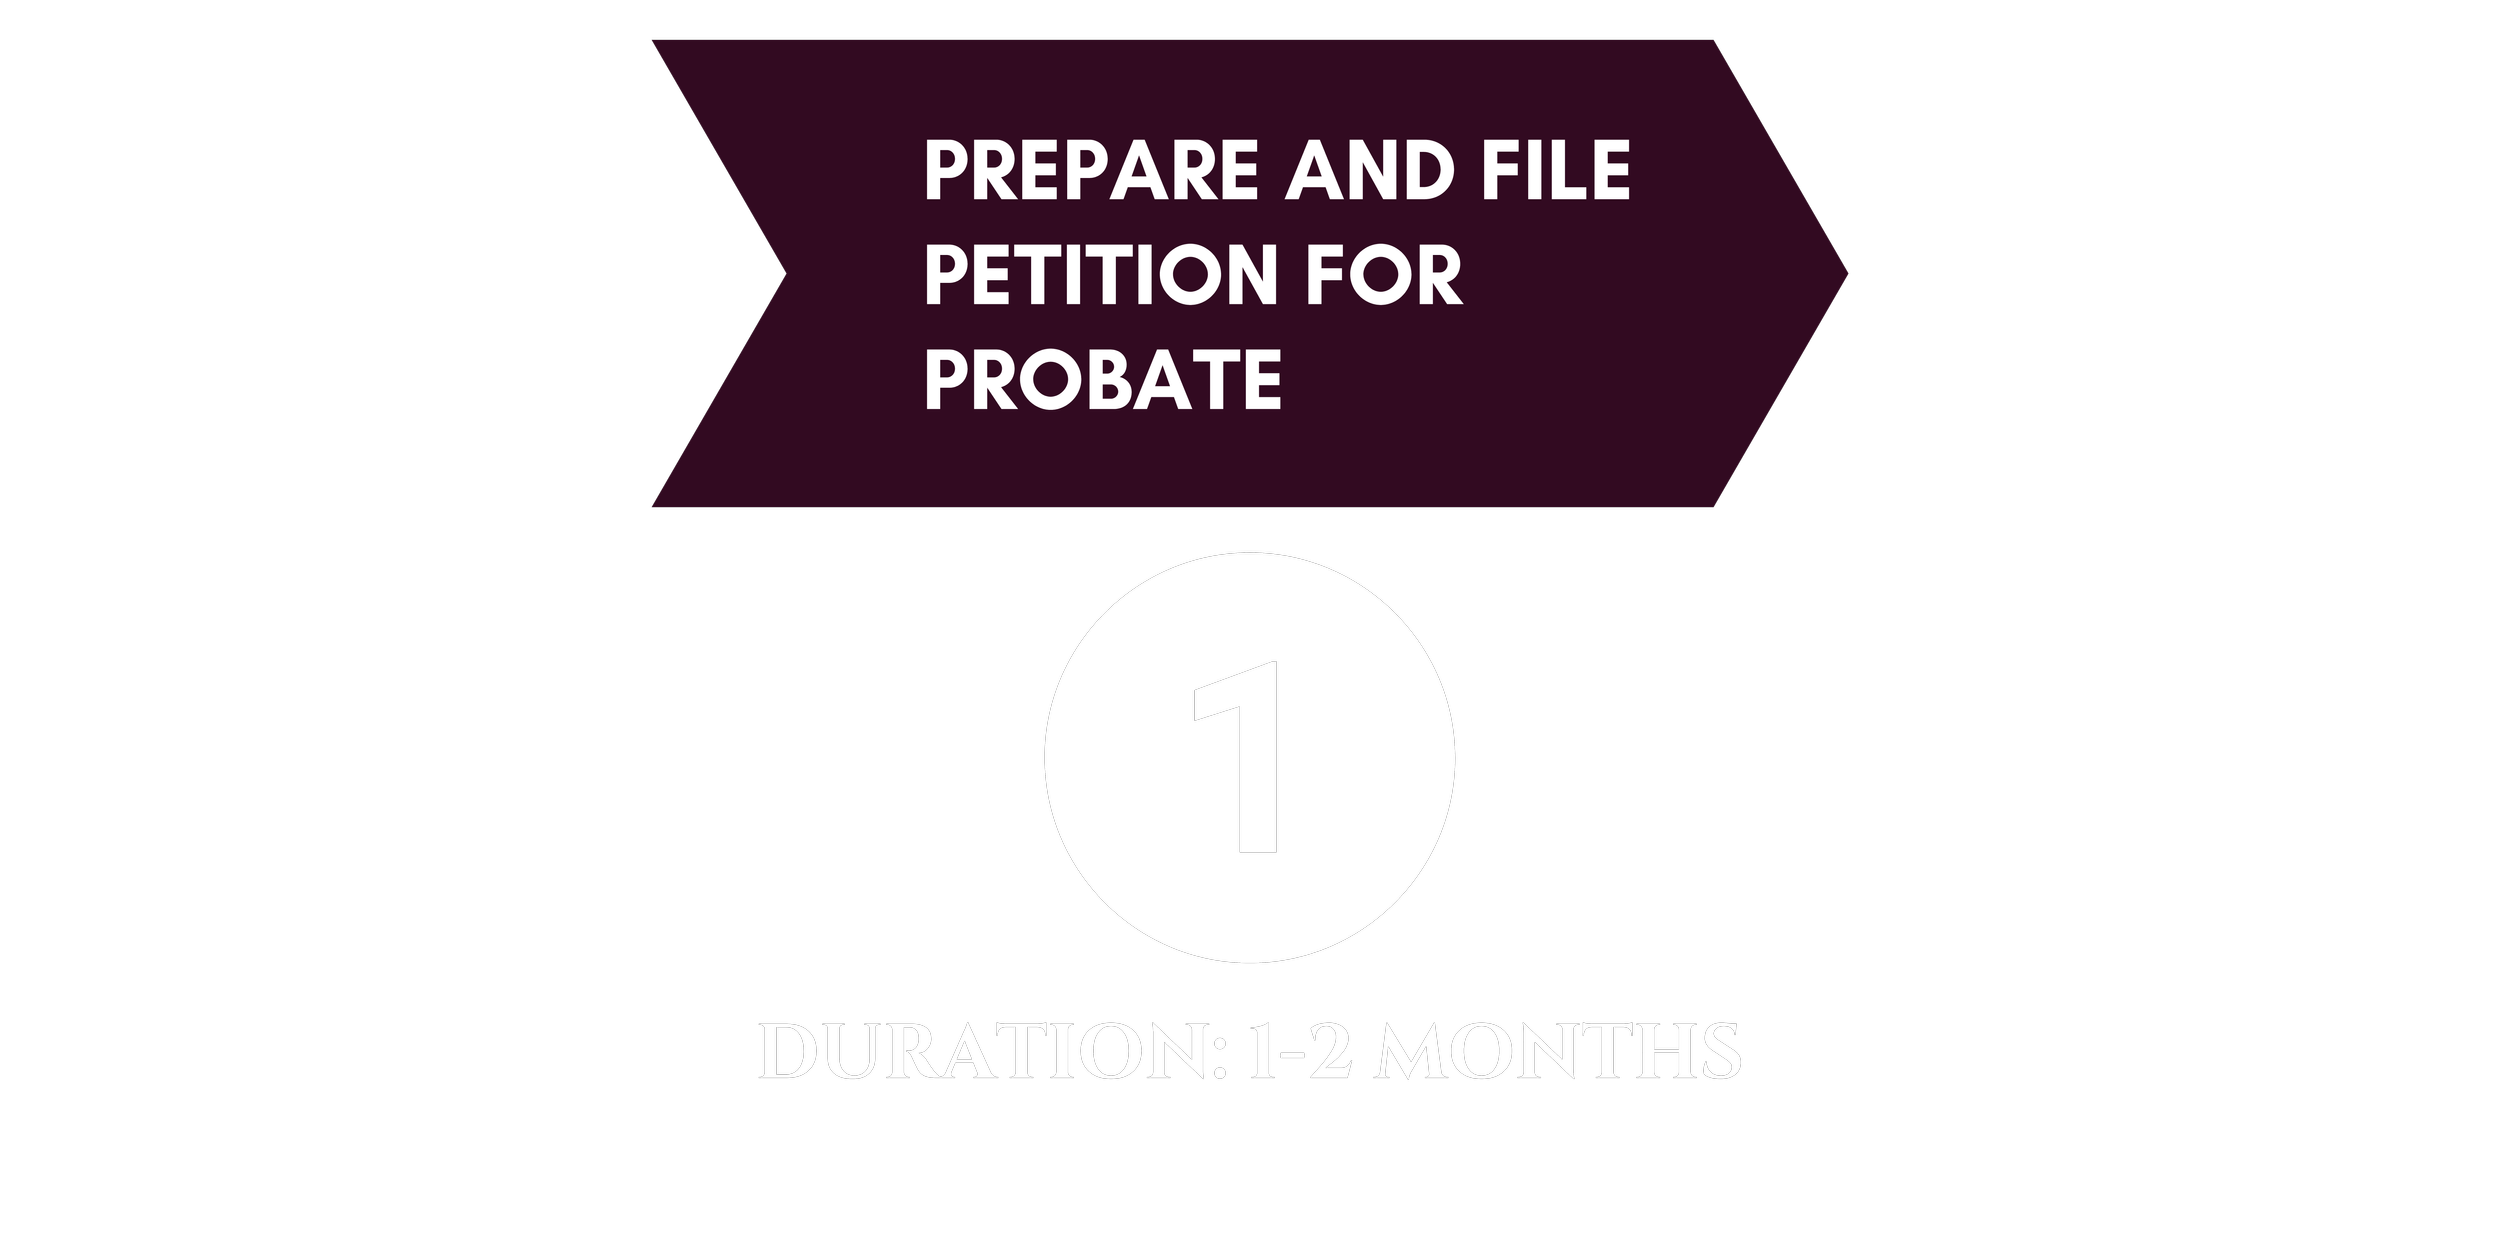 Court hearing on the Petition for Probate (9).png